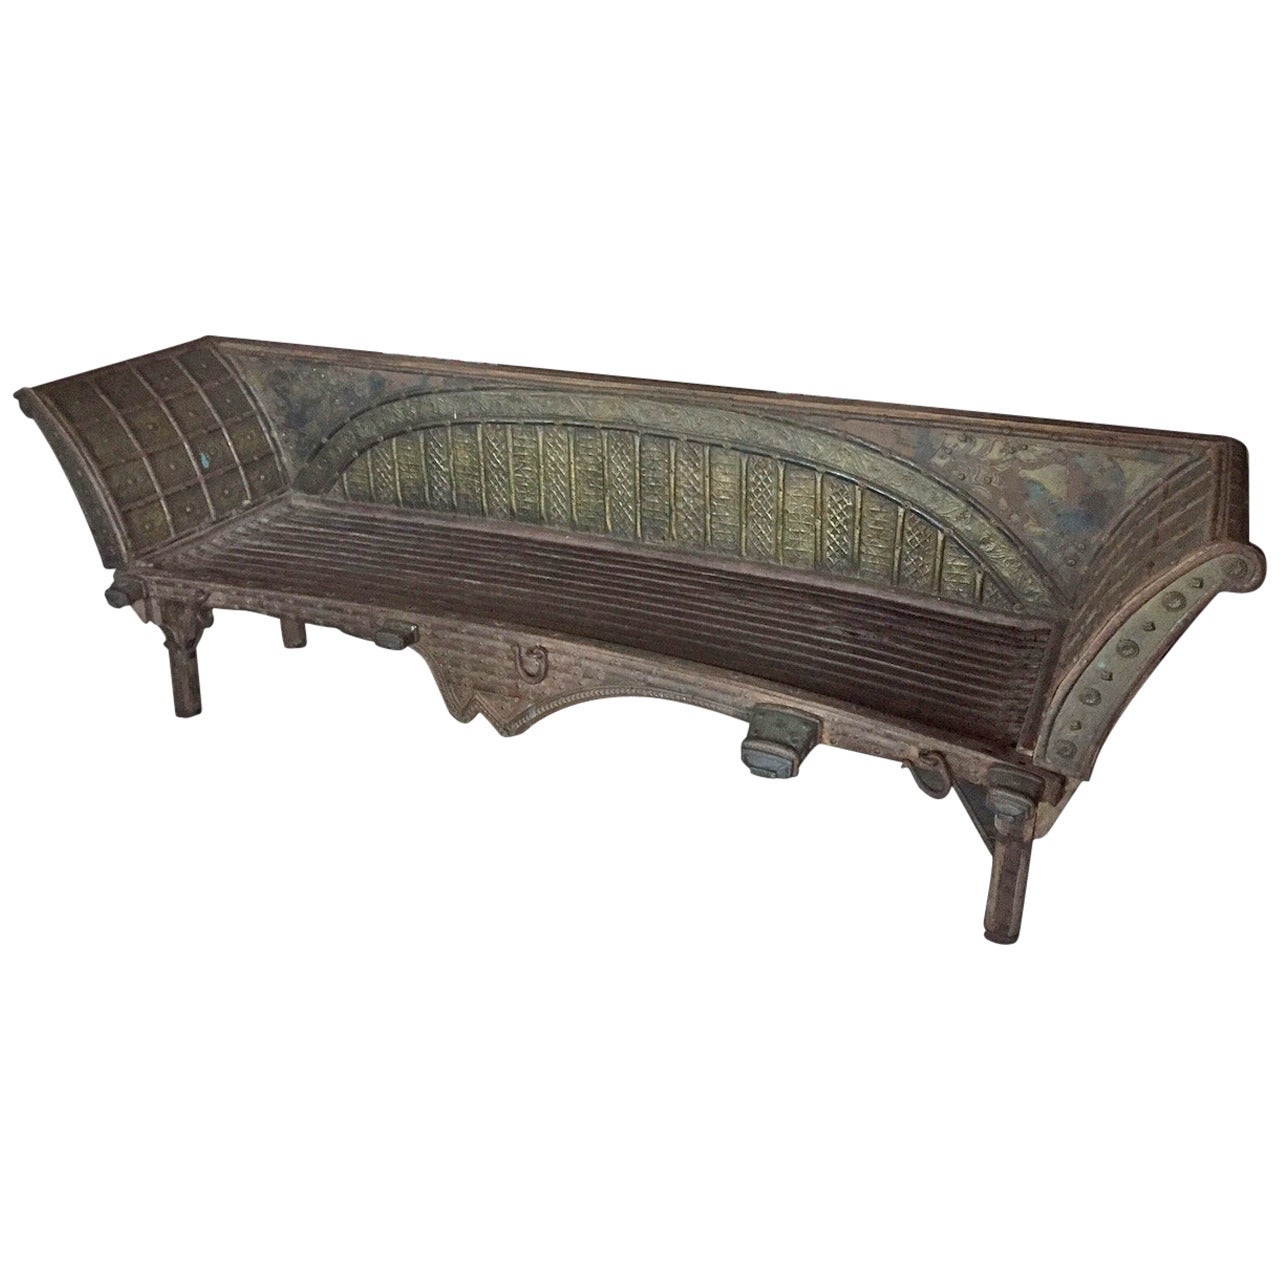 19th Century Brass and Wood  Sofa or Bench from British Raj Period For Sale